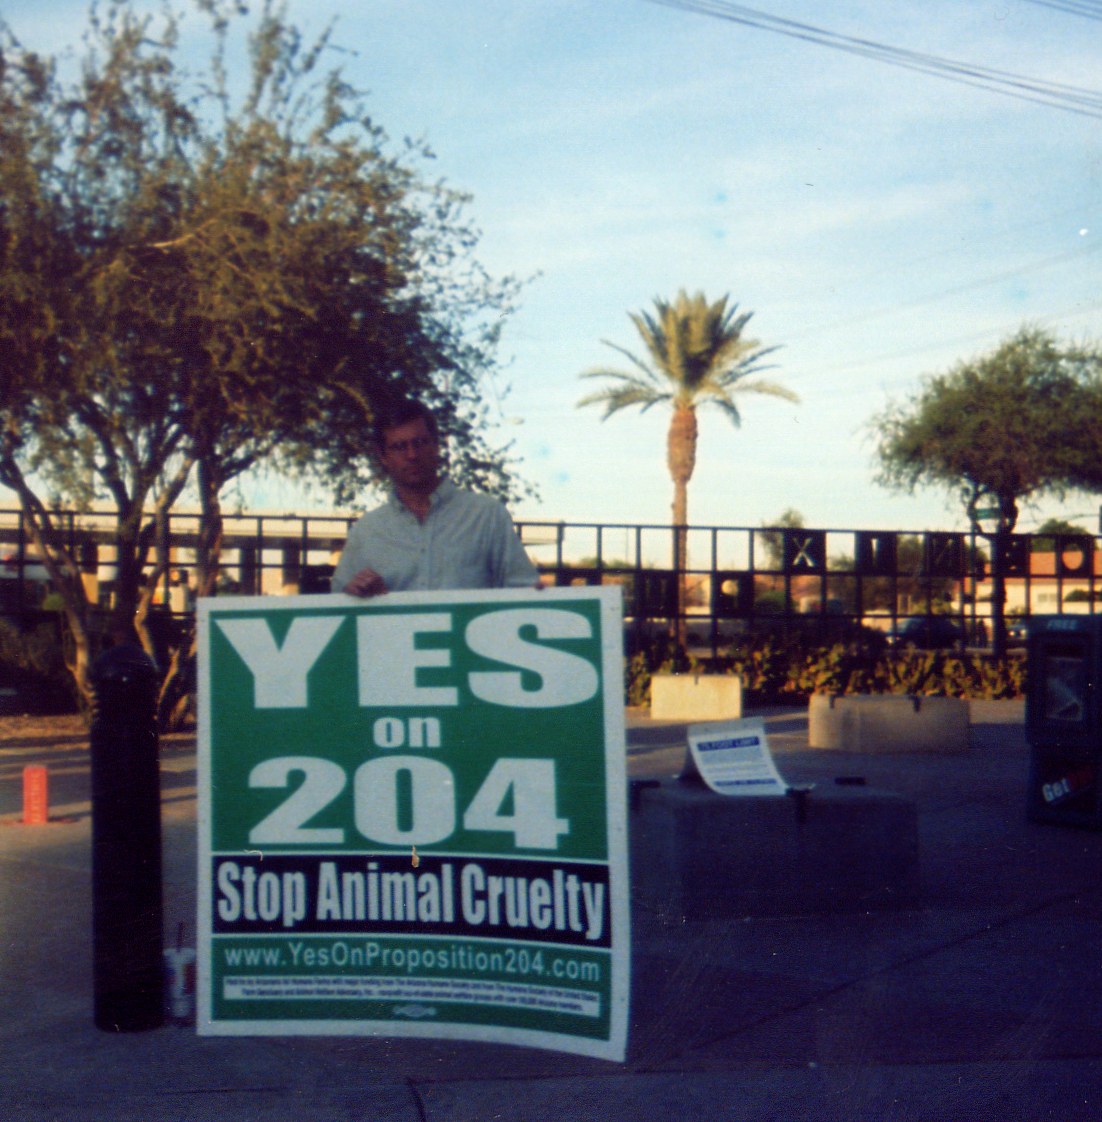 Farm Sanctuary President and Co-founder Gene Baur stands with a sign saying "Yes on 204"